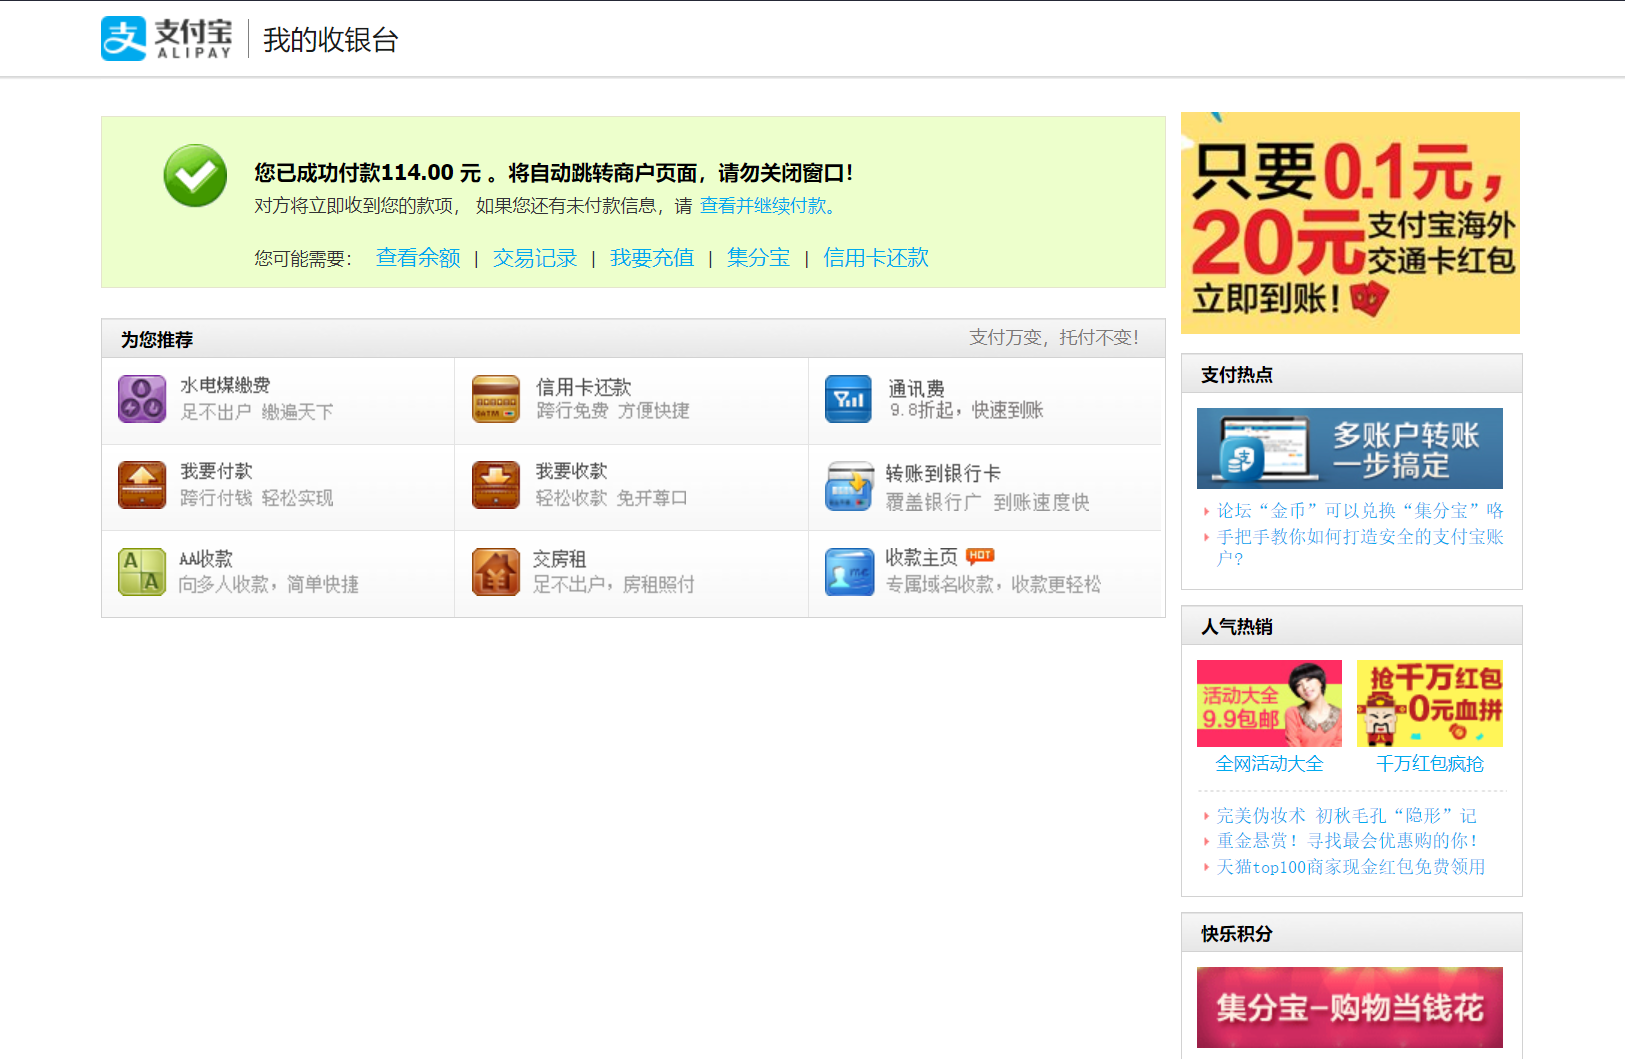 Alipay-consumer-experience-desktop-flow-in-chinese-succsseful-payment-page